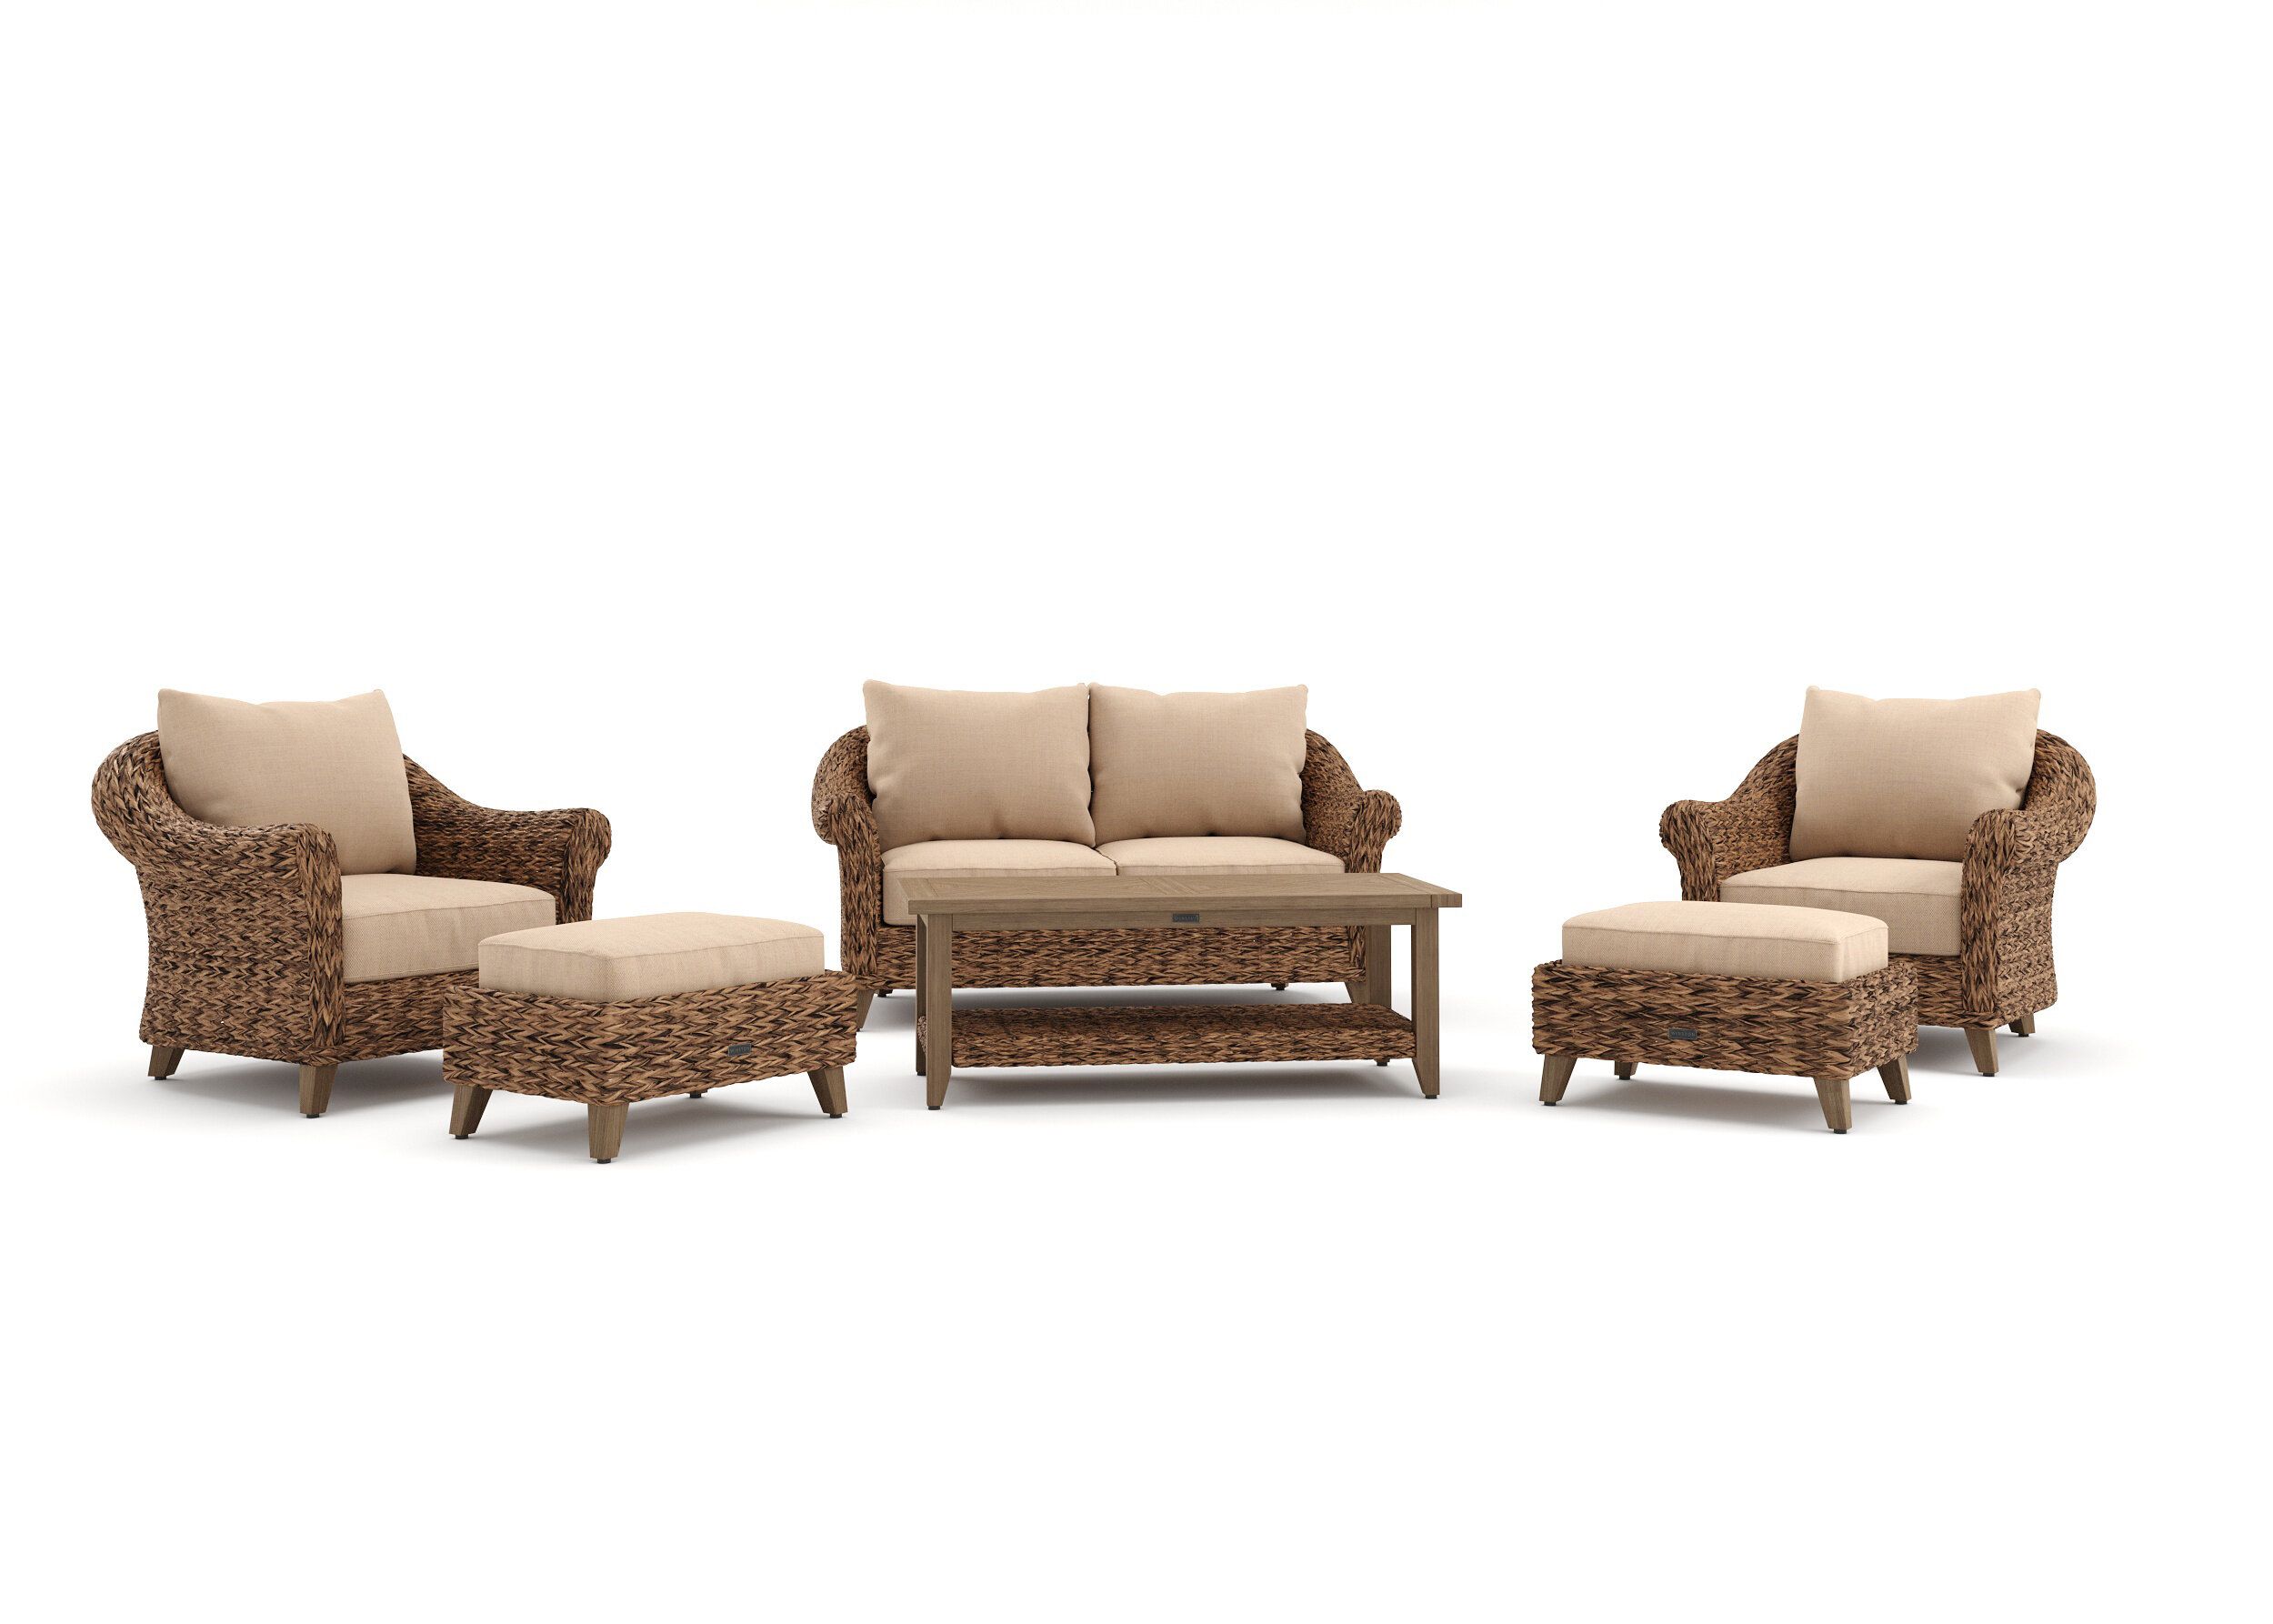 Winston Cayman Loveseat, Stationary Lounge Chair, Ottoman, And Coffee Table  6 Piece Rattan Seating Group With Sunbrella Cushions | Perigold For Cushioned Chair Loveseat Tables (Photo 14 of 15)